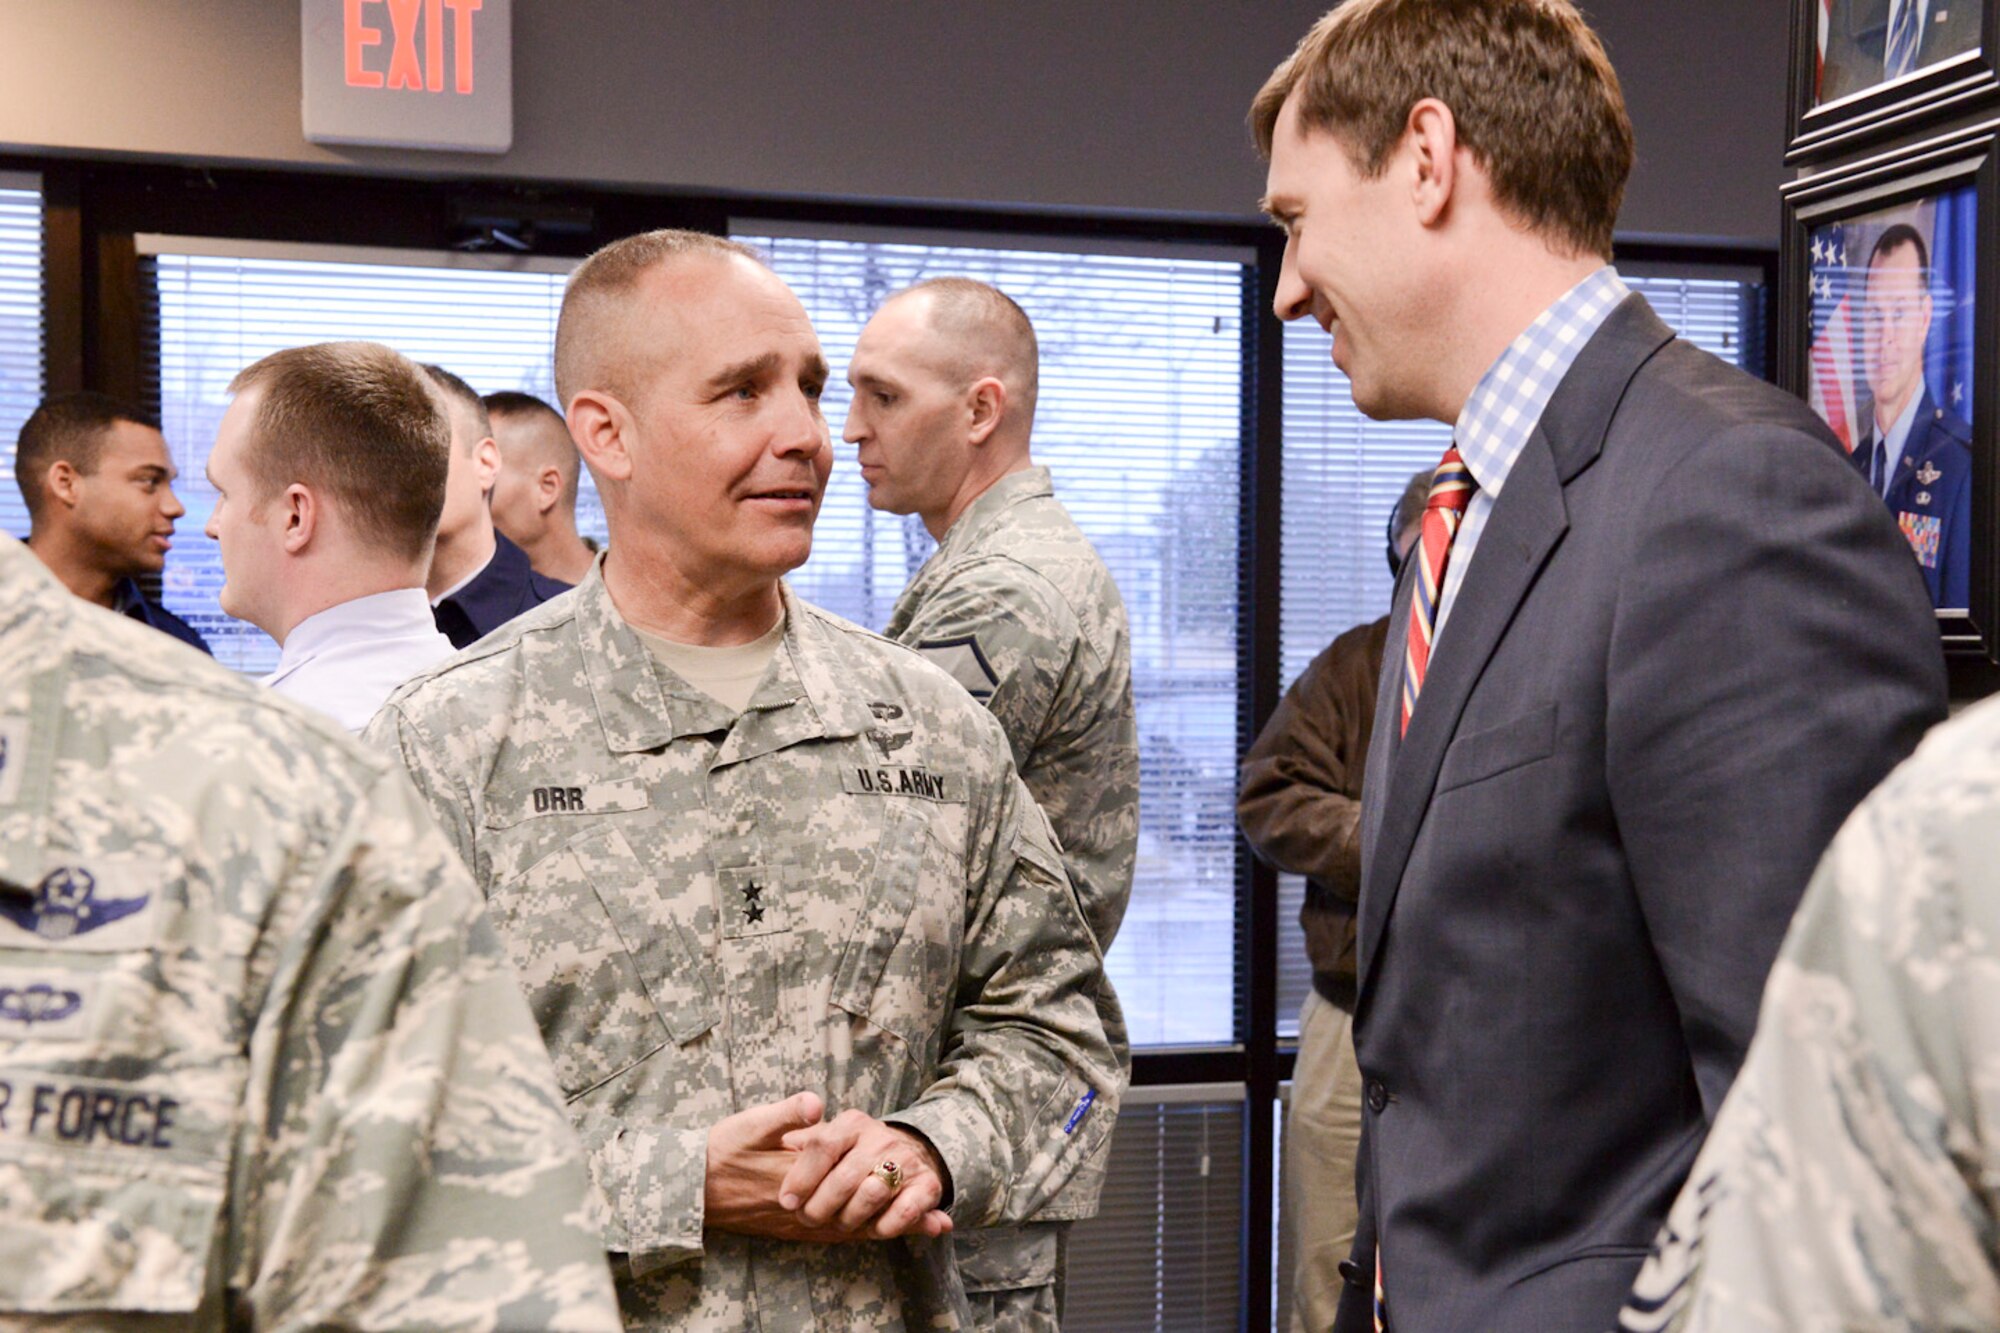 The Adjutant General of the Iowa National Guard, Maj. Gen. Timothy Orr (left), speaks to Council Person, Ward 2, West Des Moines, Iowa, John Mickelson (right), as members of the Iowa Air and Army National Guard celebrate the opening of the 132d Wing, Des Moines, Iowa off-site Recruiting Operation Center during a ribbon cutting ceremony held at the new Recruiting Operation Center in West Des Moines, Iowa on Tuesday, March 24, 2015.  (U.S. Air National Guard photo by Staff Sgt. Linda K. Burger/Released)